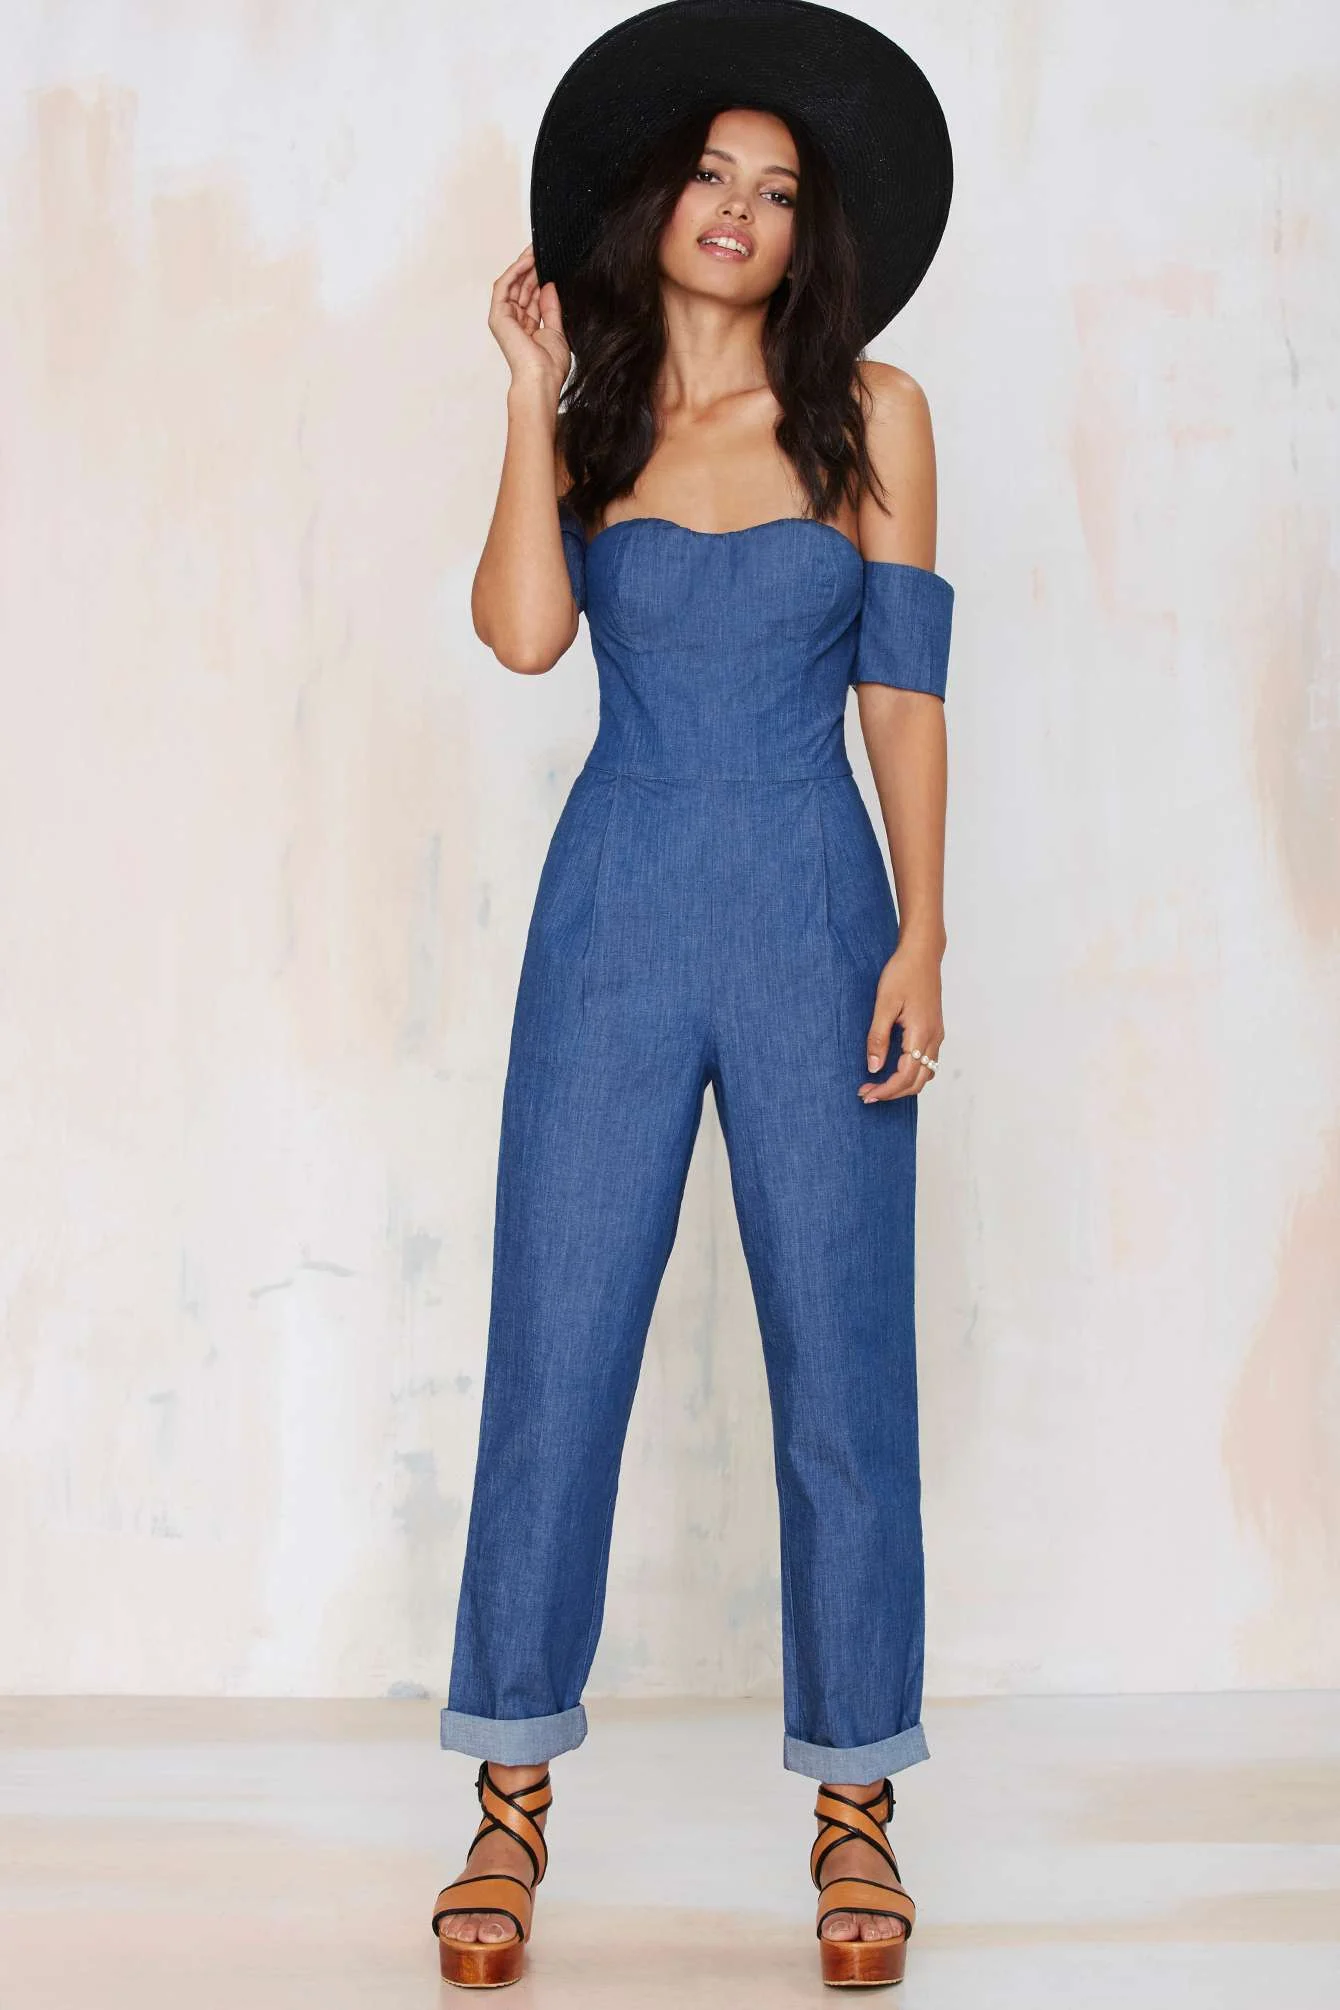 “Jumpsuit Trends That Are Redefining Fashion Standards”